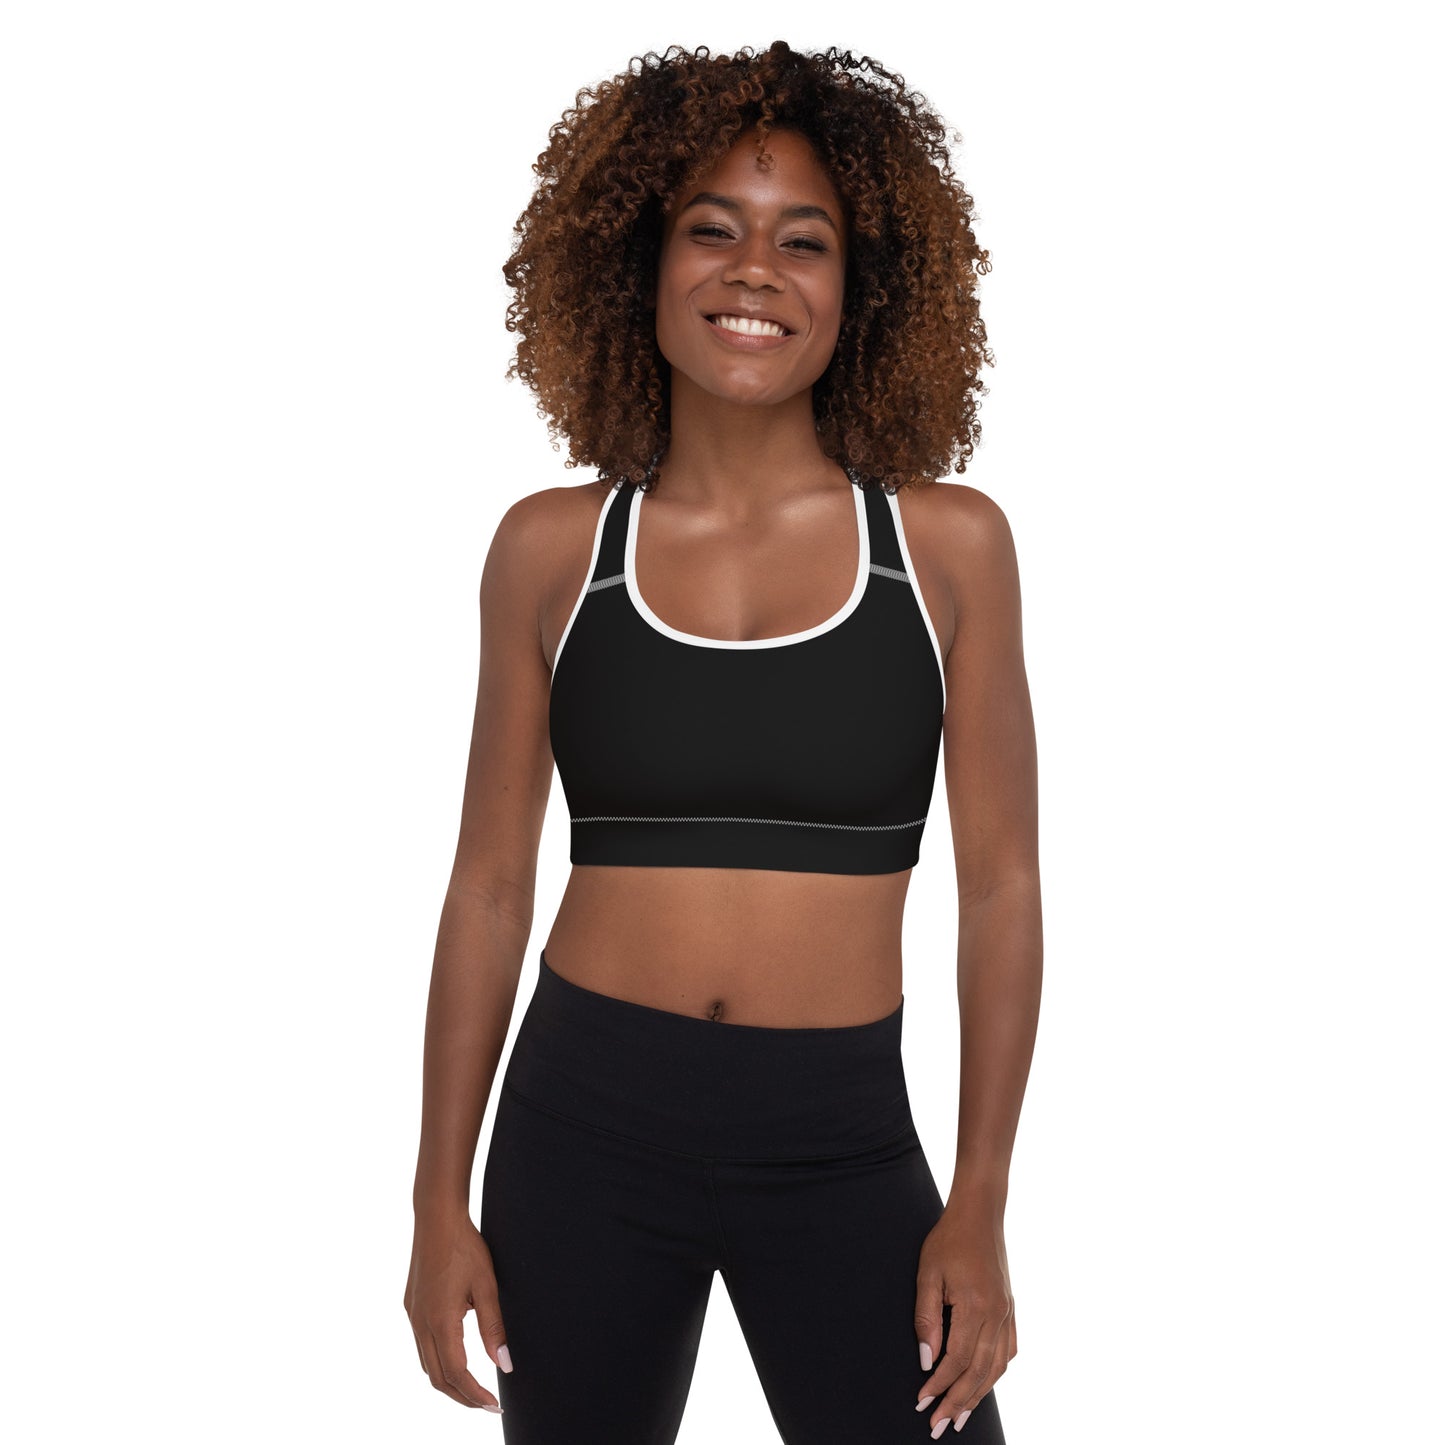 A picture of a women standing facing the camera wearing a Black padded sports bra - crop top - front side